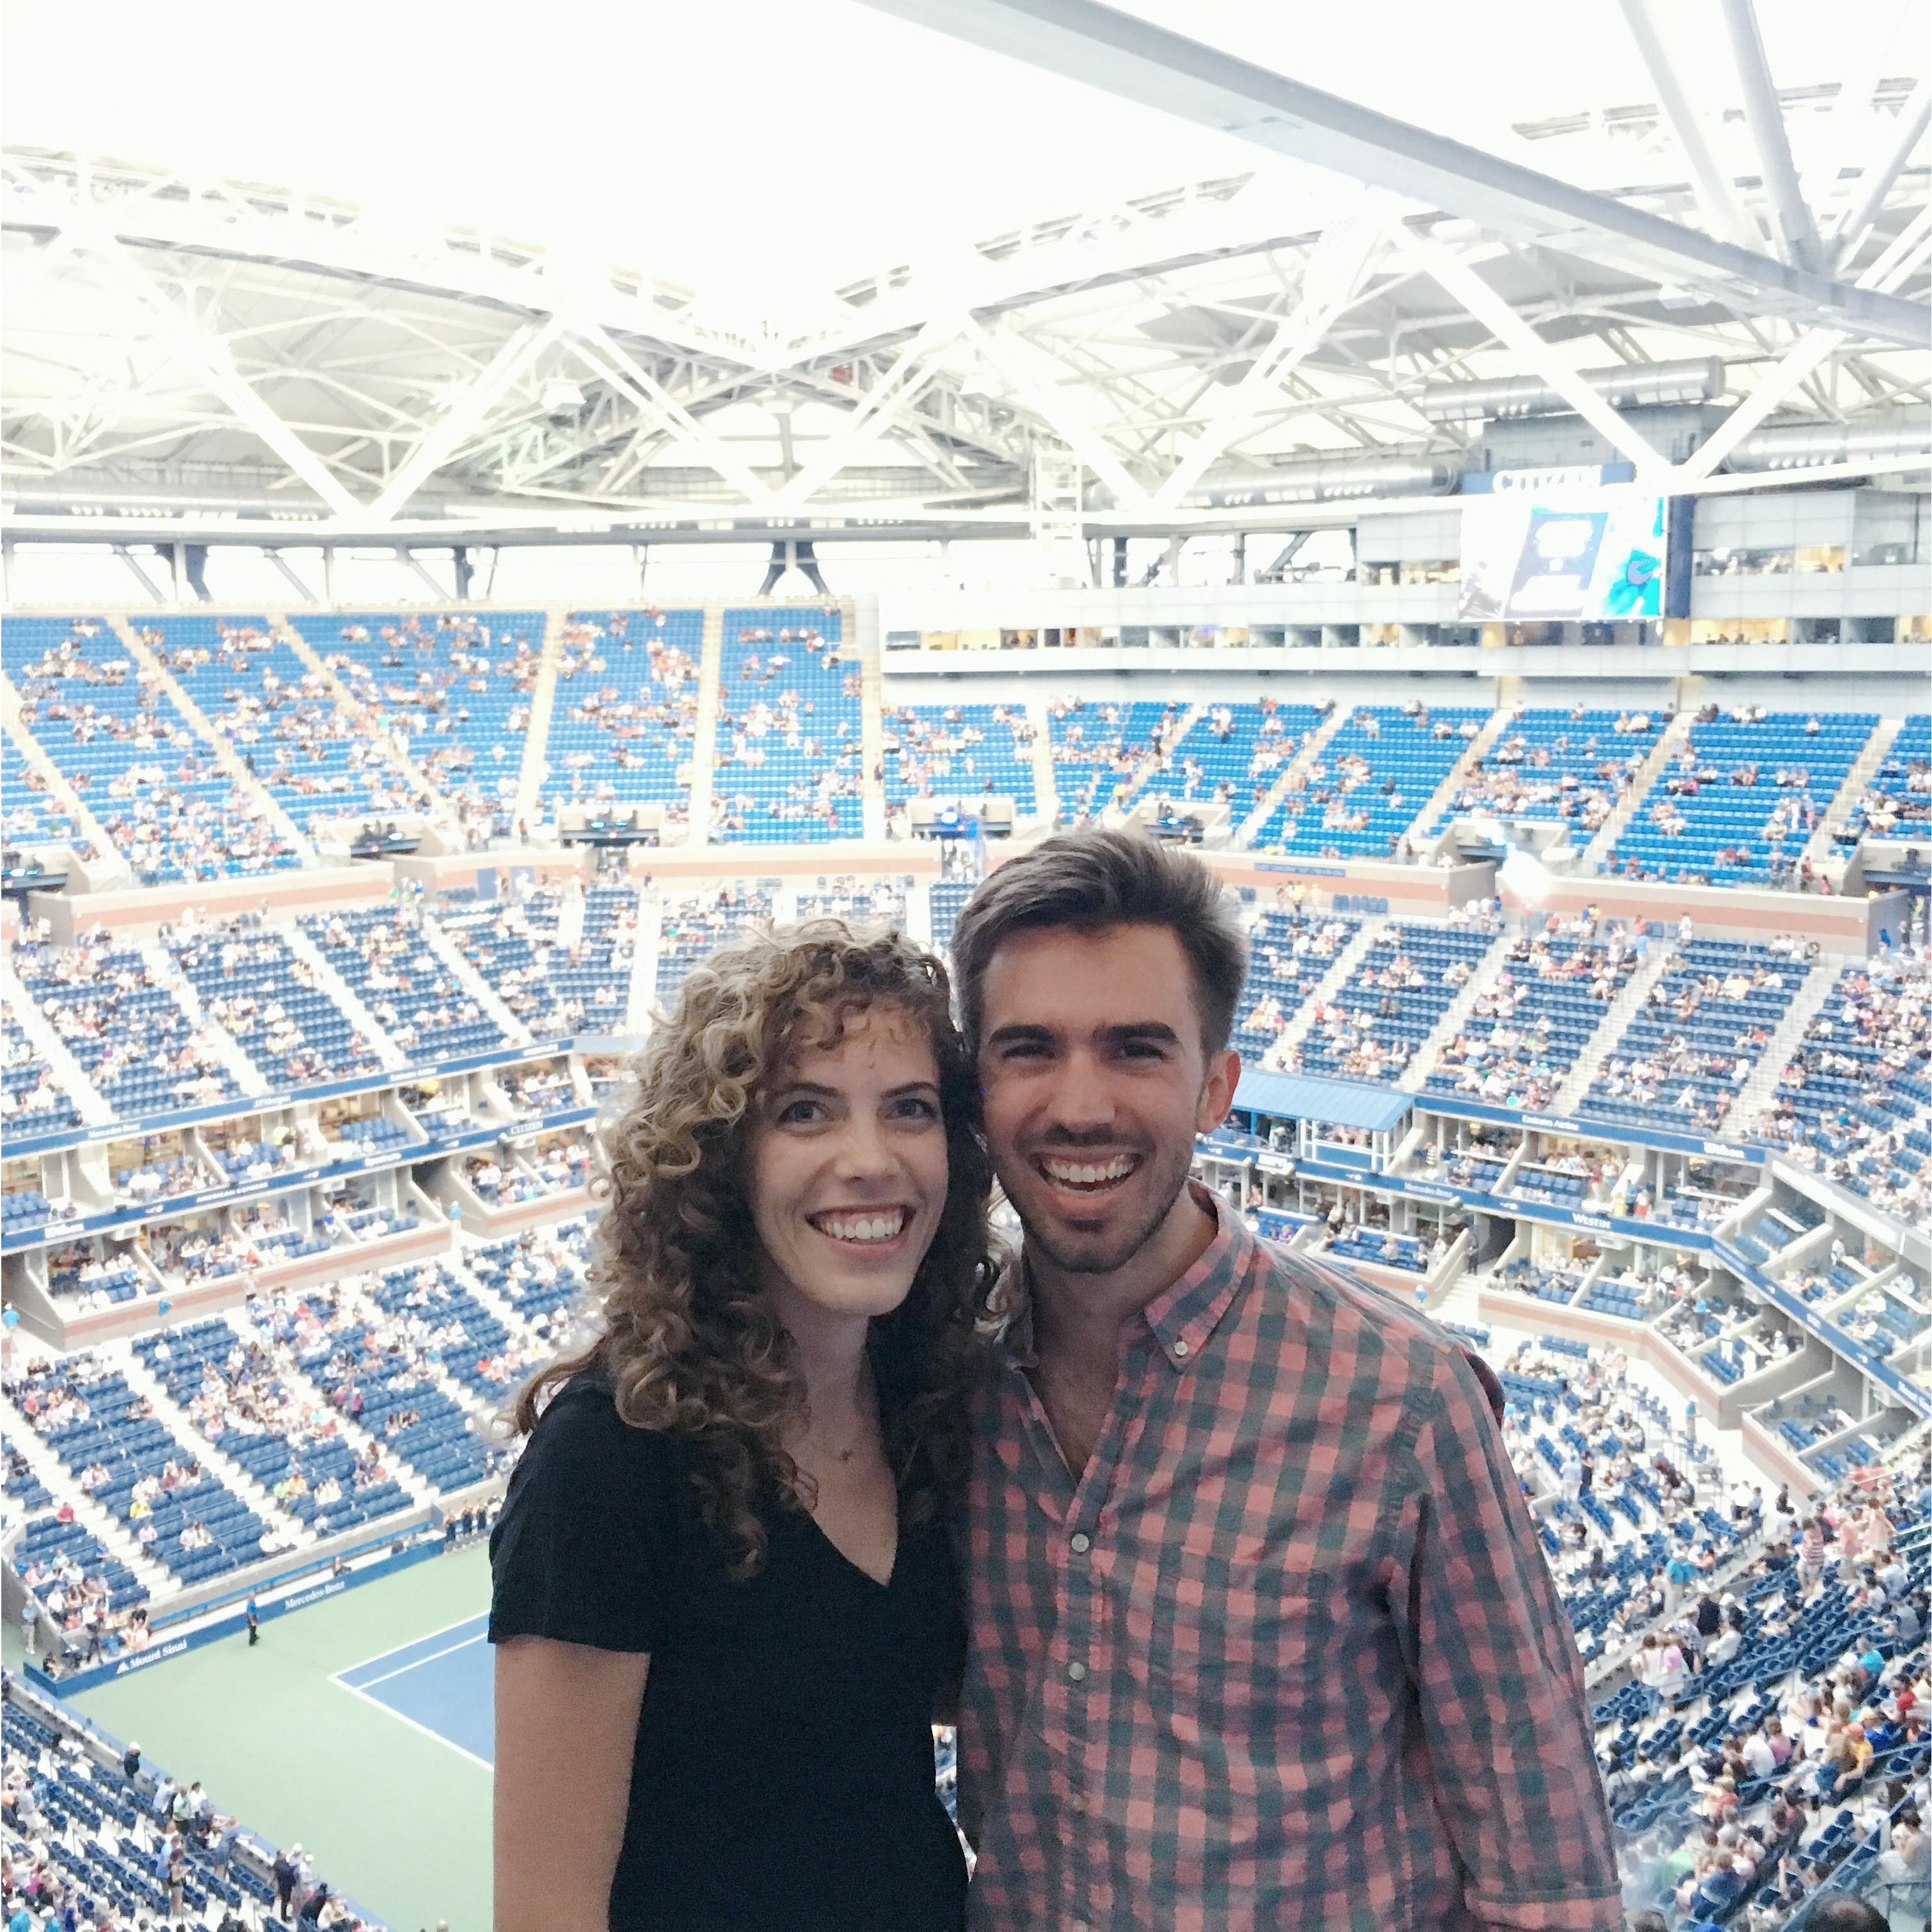 U.S. Open, a staple for us